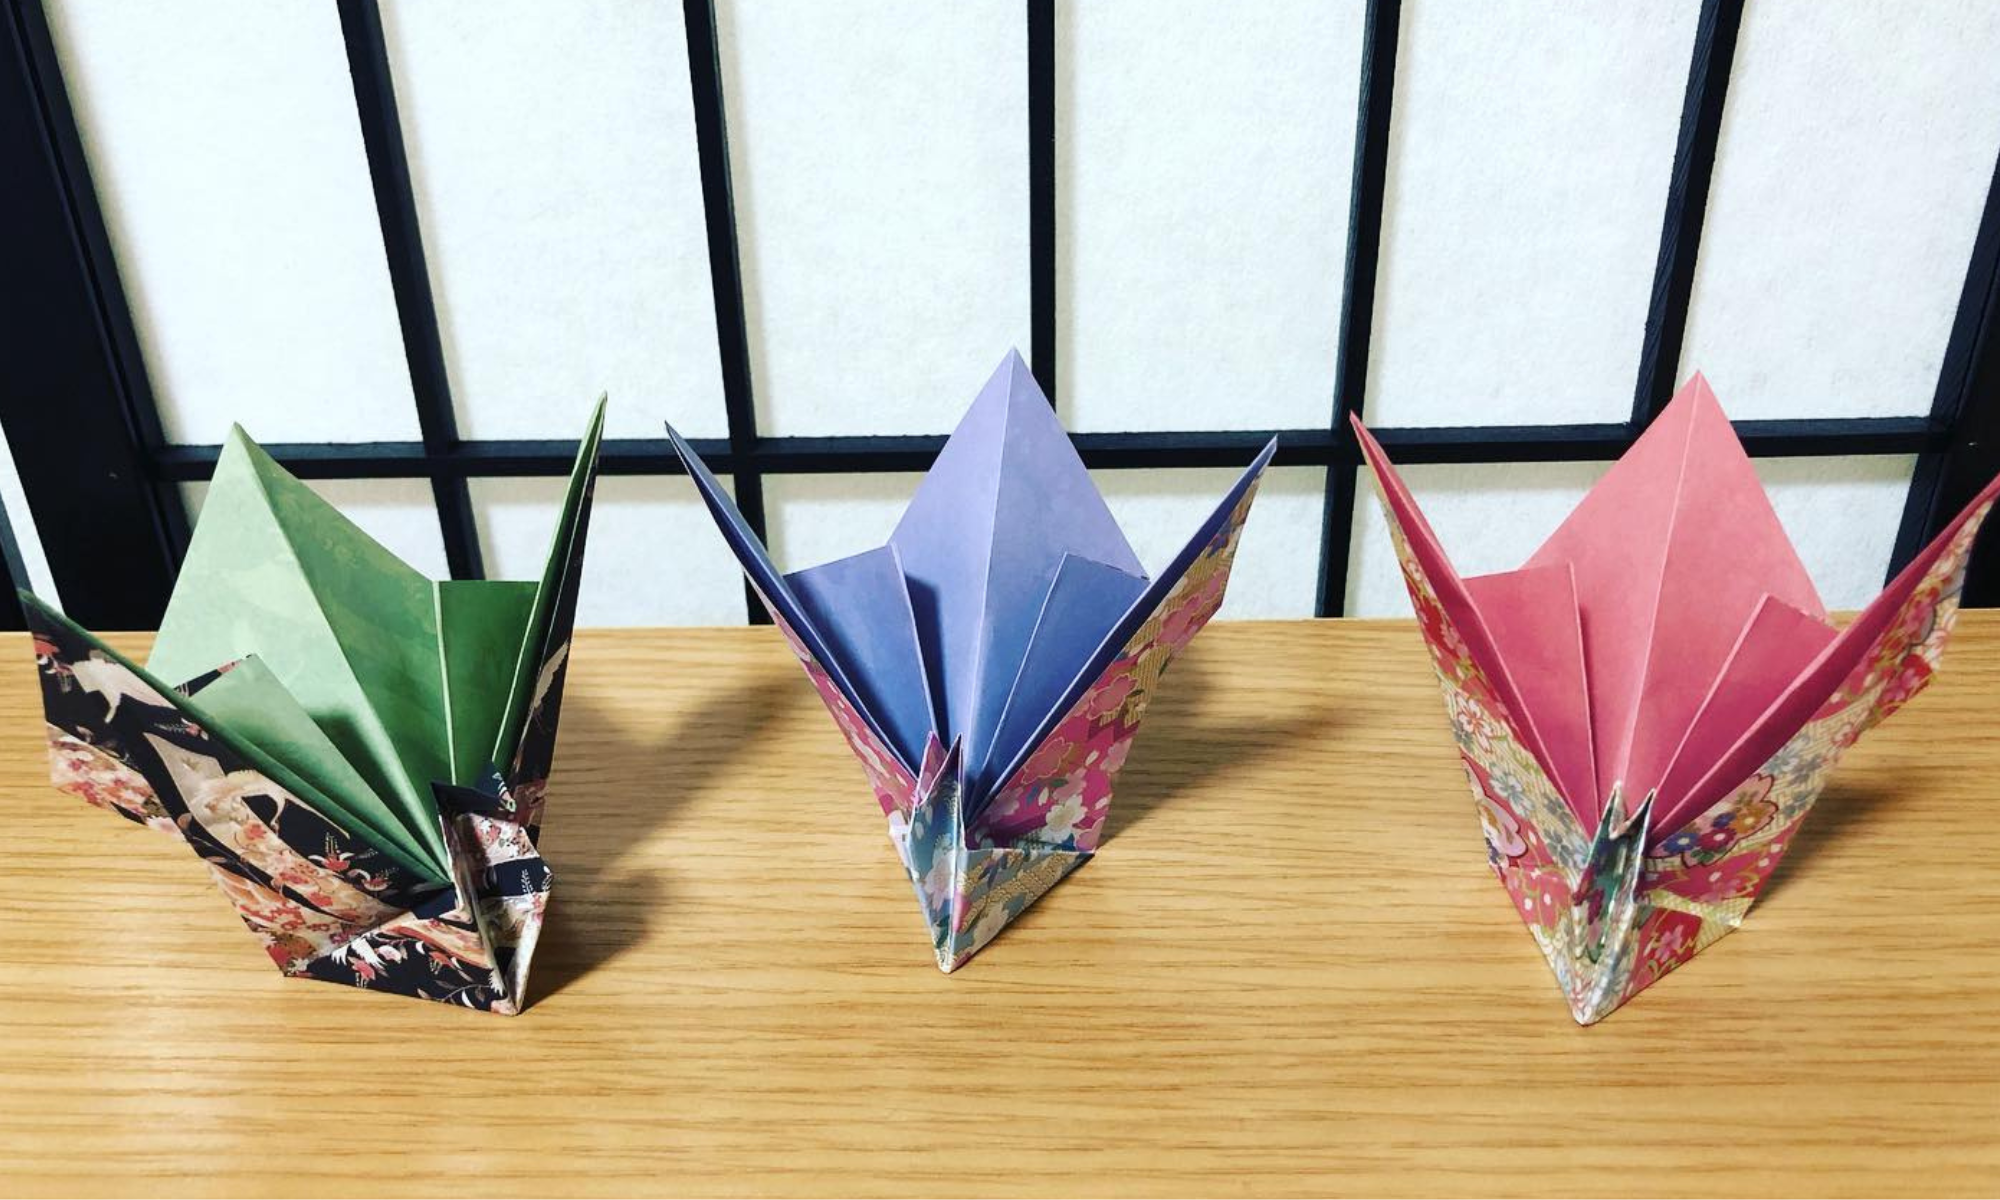 Origami is a traditional art of paper crafting from Japan. It's a therapeutic craft that requires precision and concentration. How to do origami. Things to do near me.